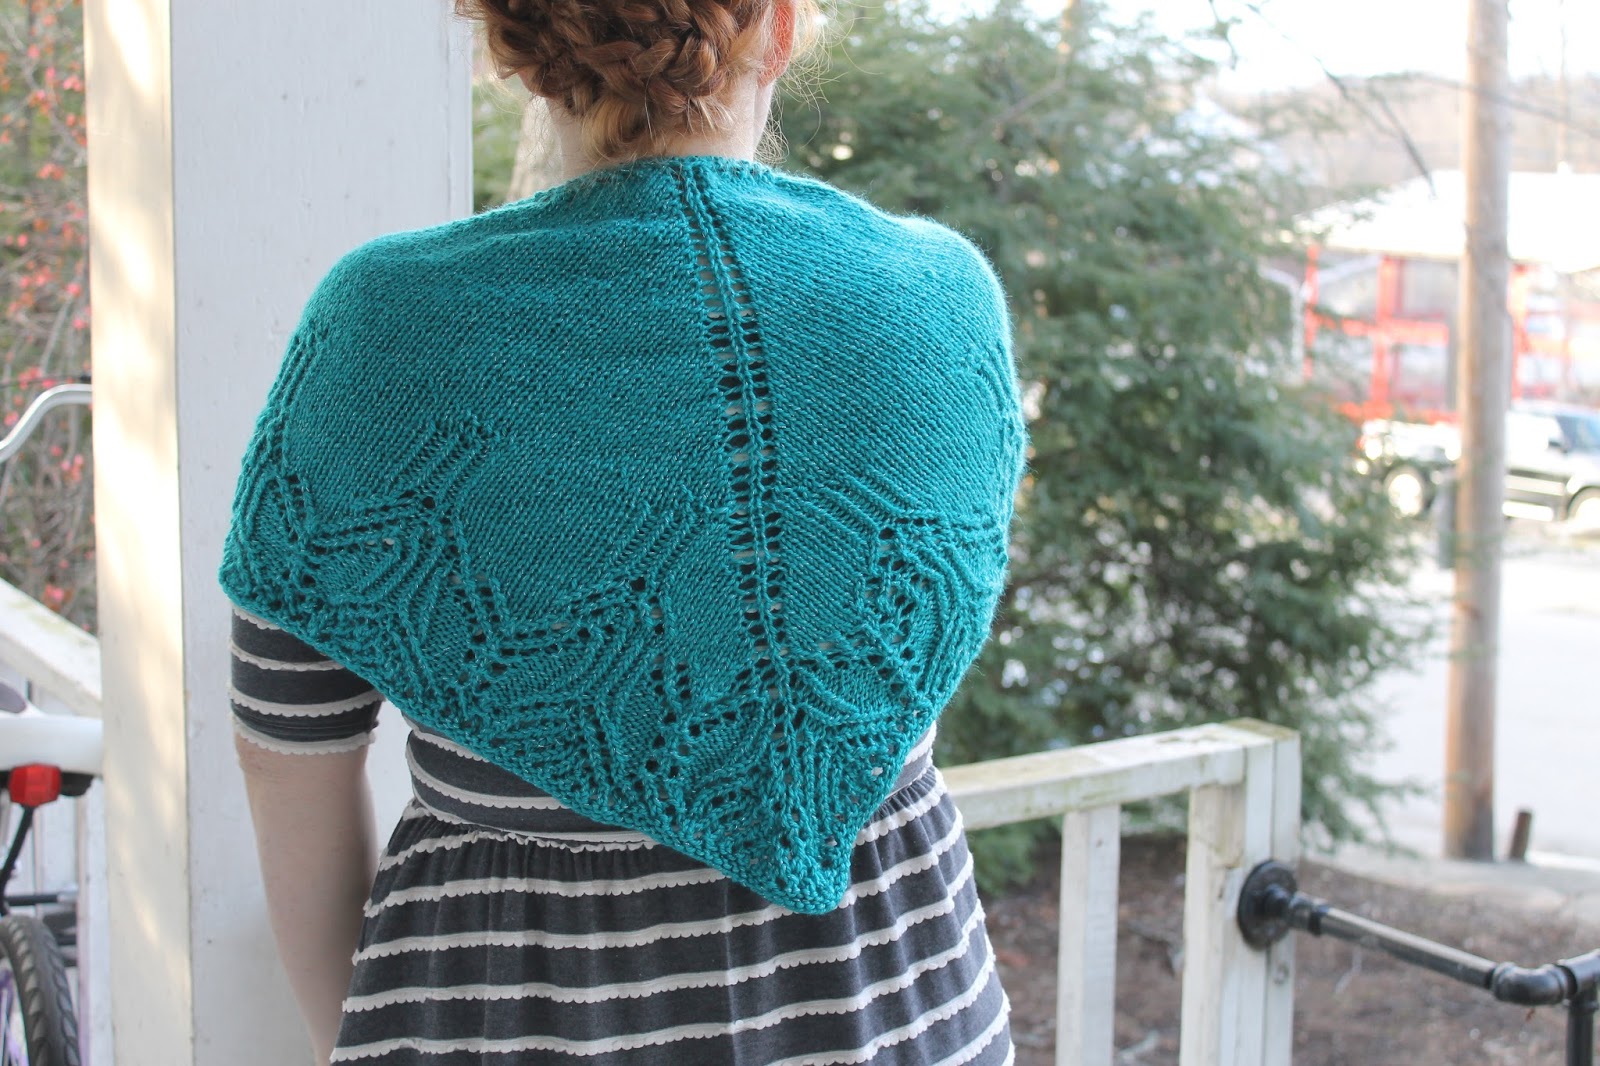 The Feisty Redhead: Waterspout Knit Lace Shawl